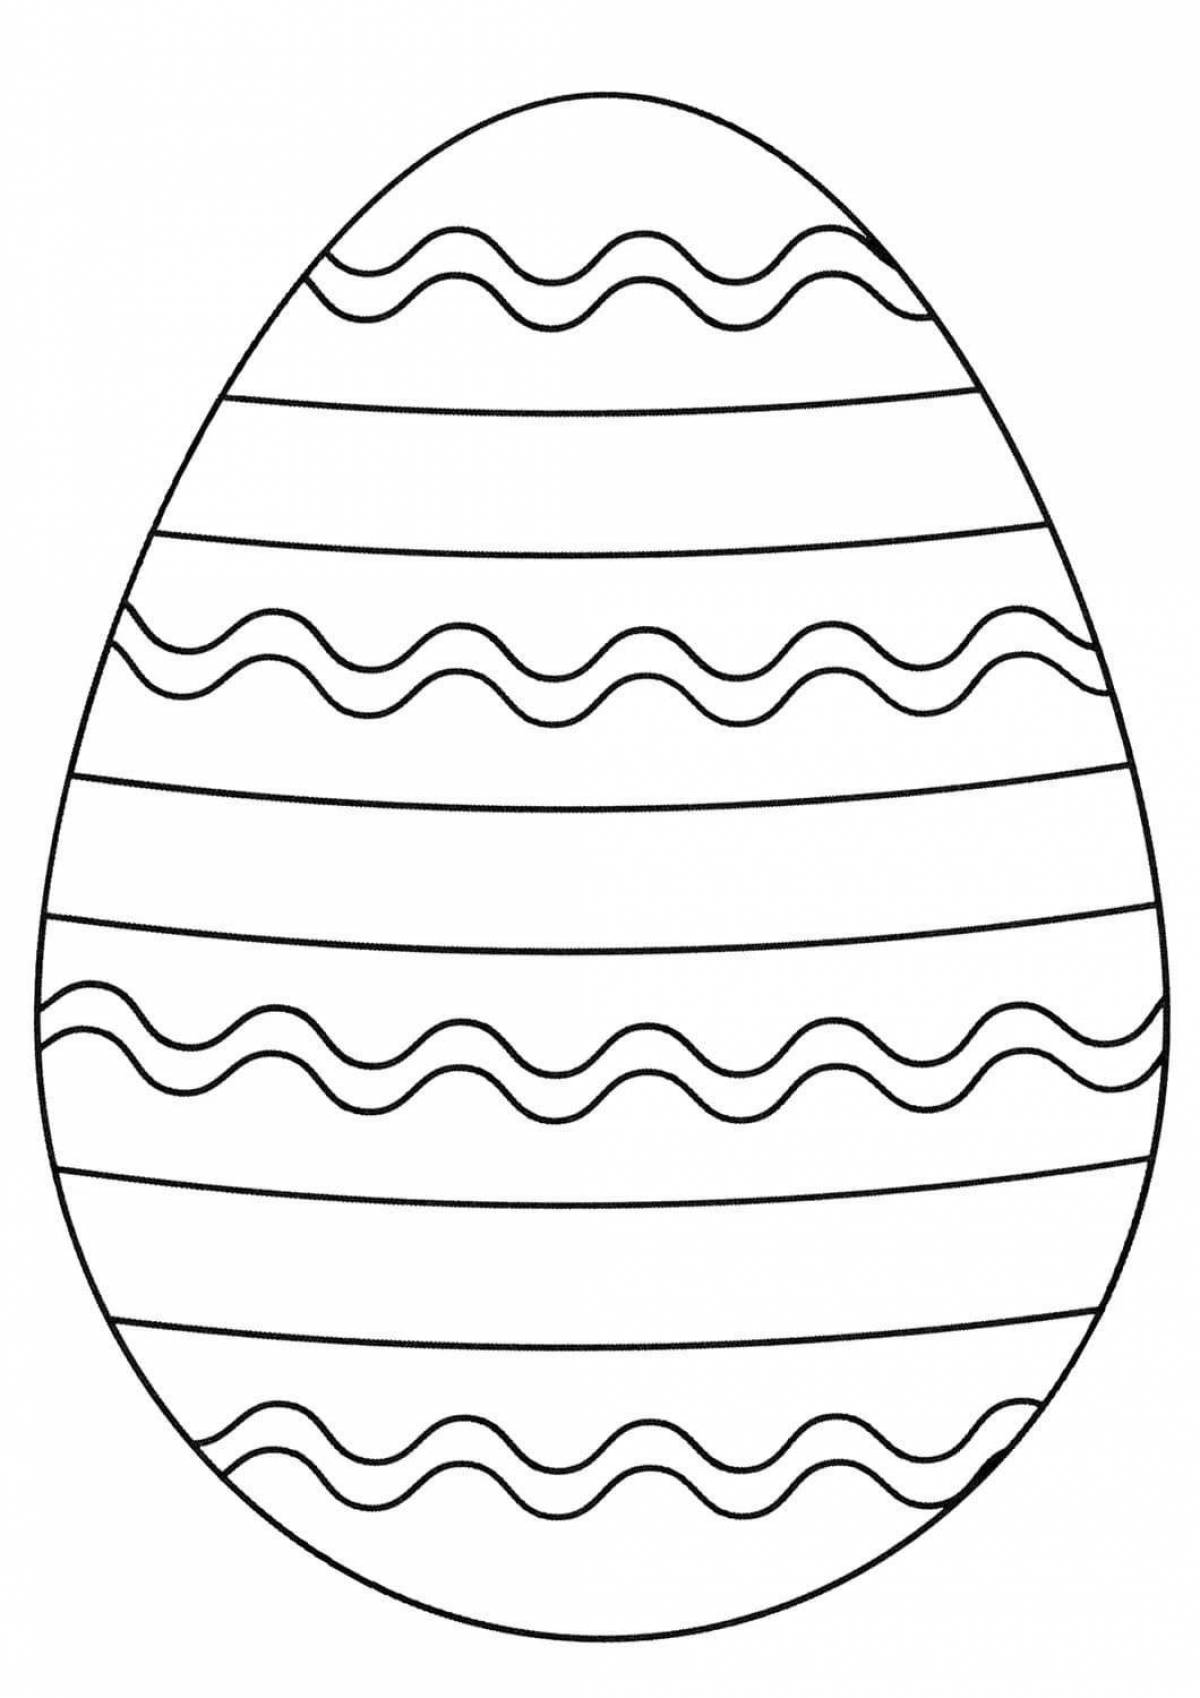 Detailed egg coloring